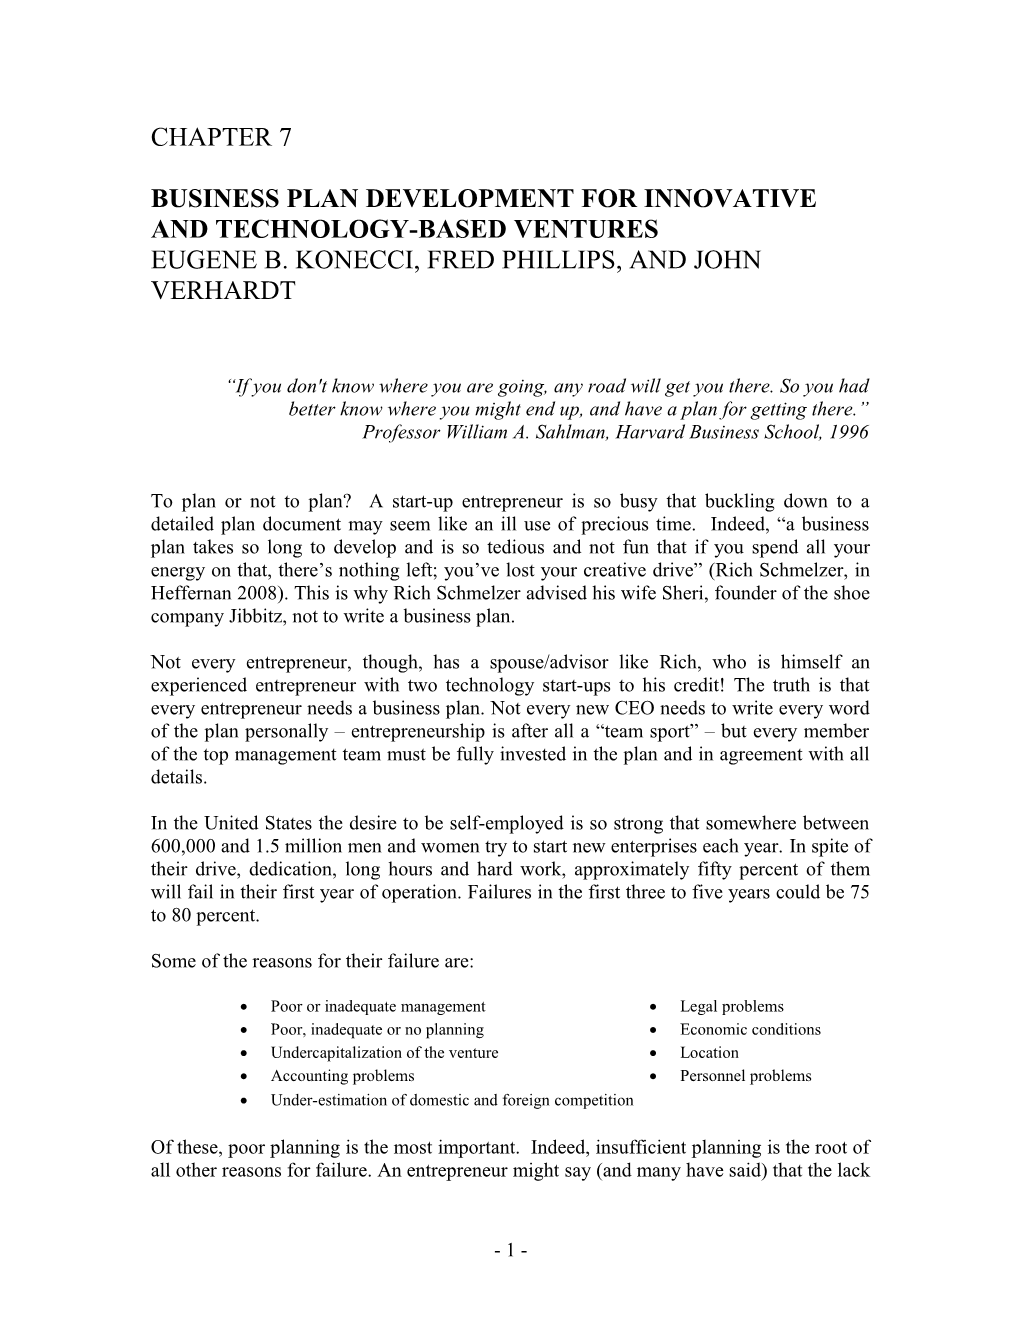 Business Plan Development for Innovative and Technology-Based Ventures